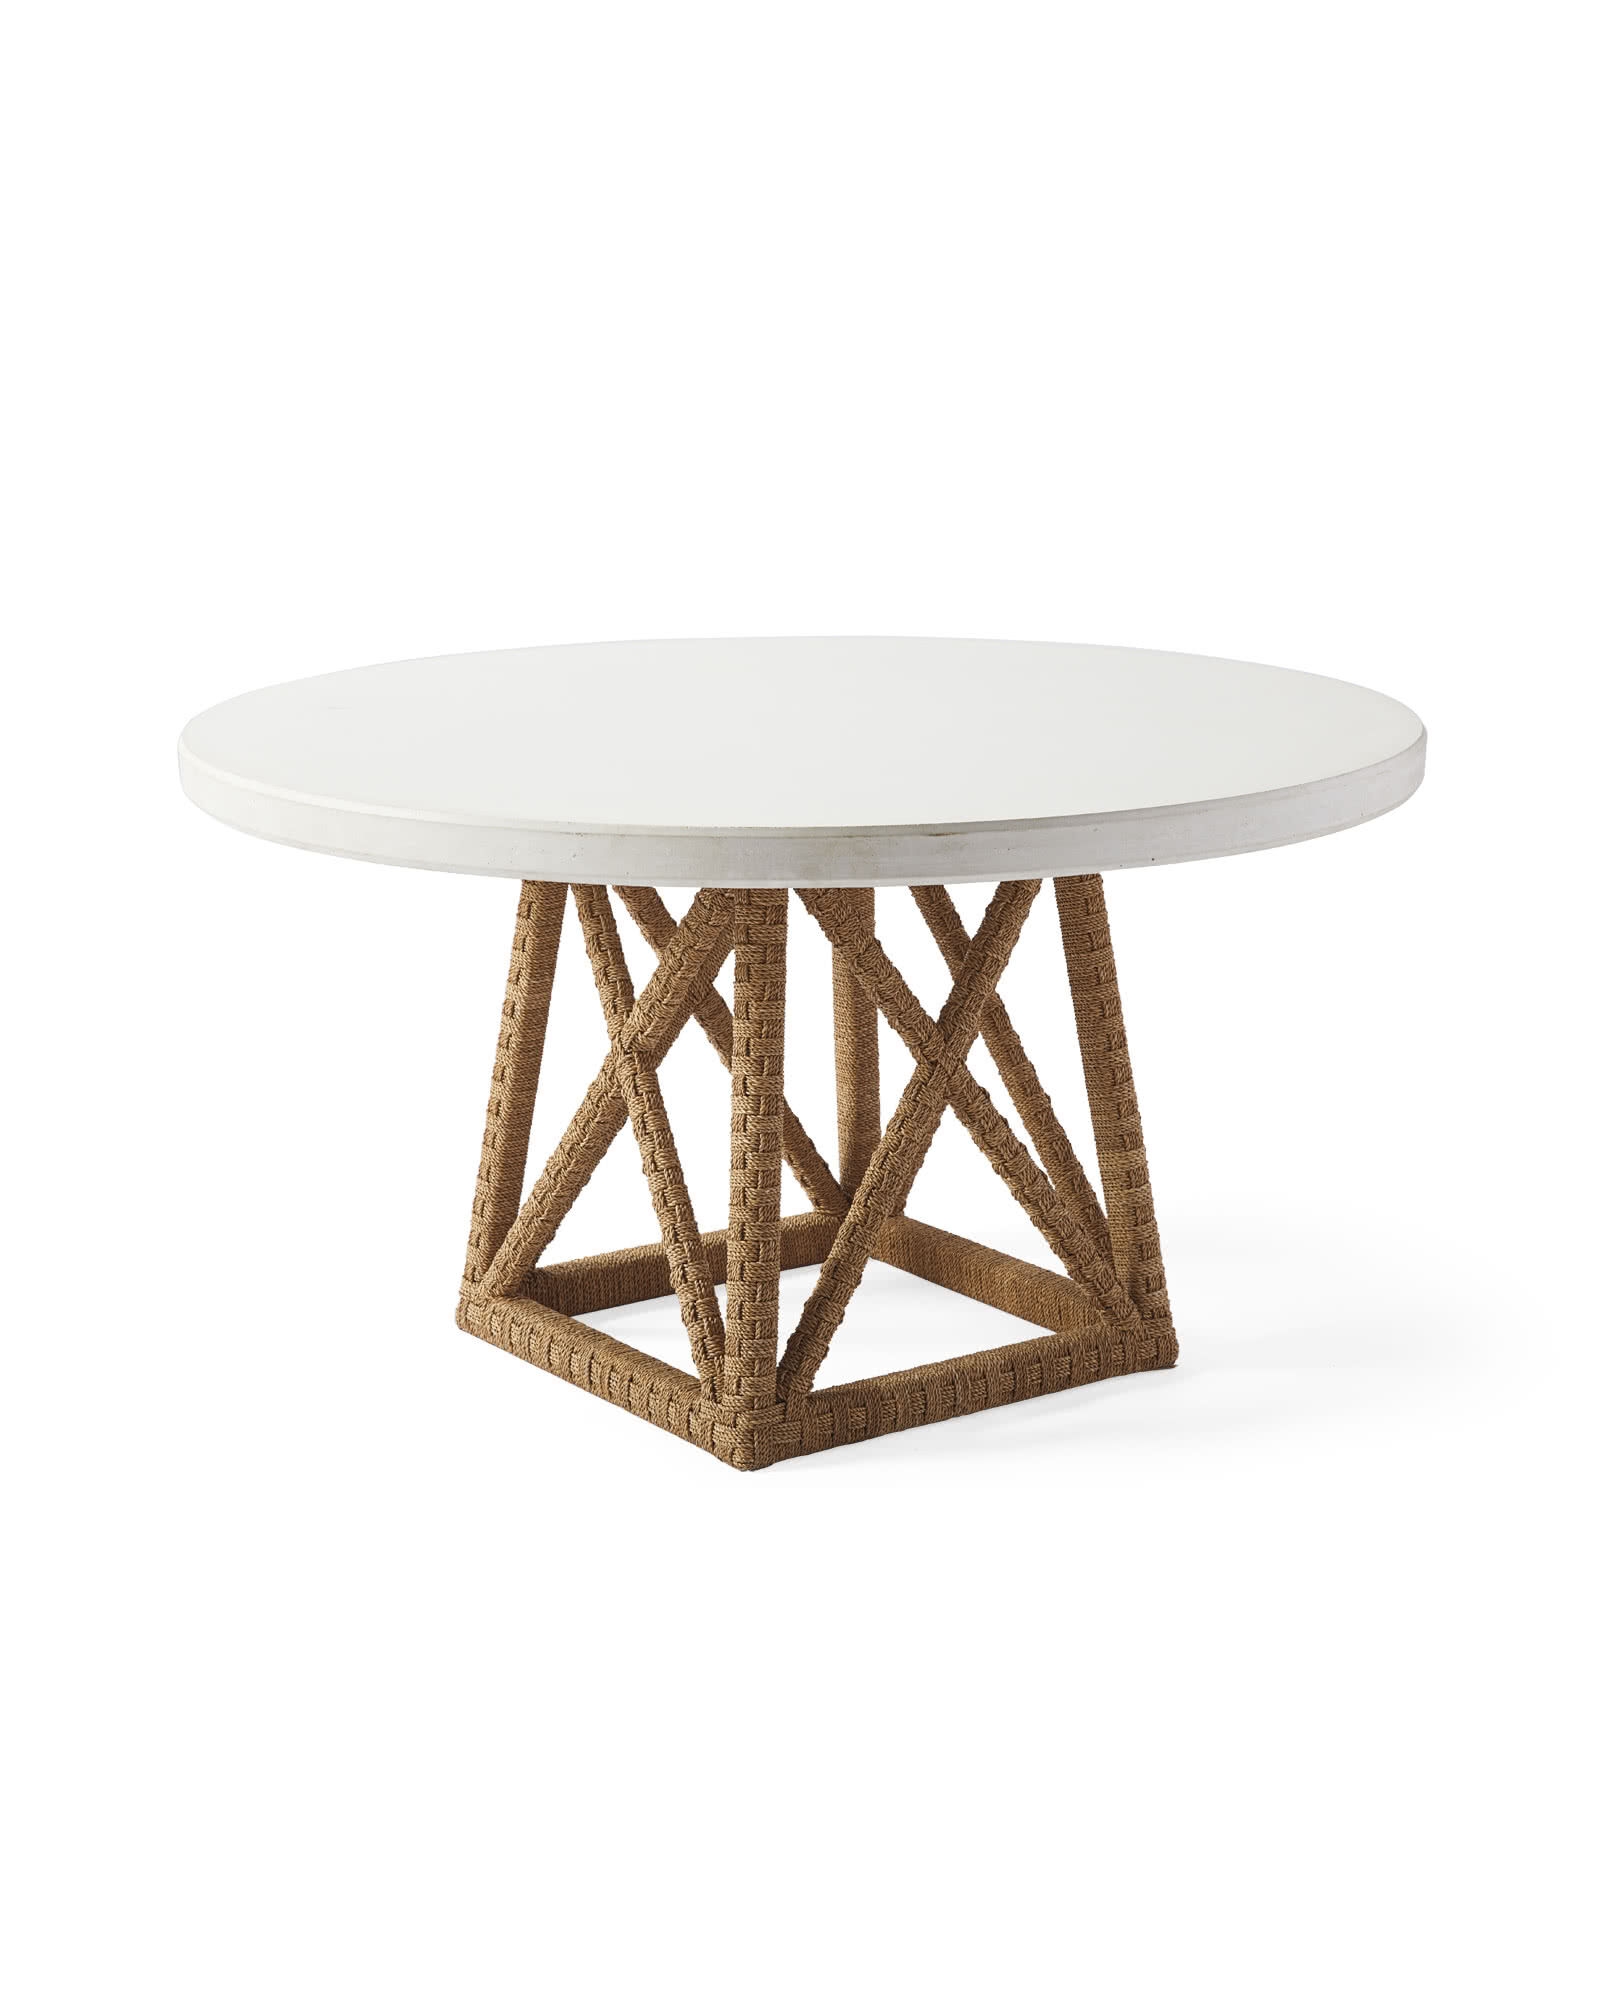 Thornhill Round Dining Table - Image 0